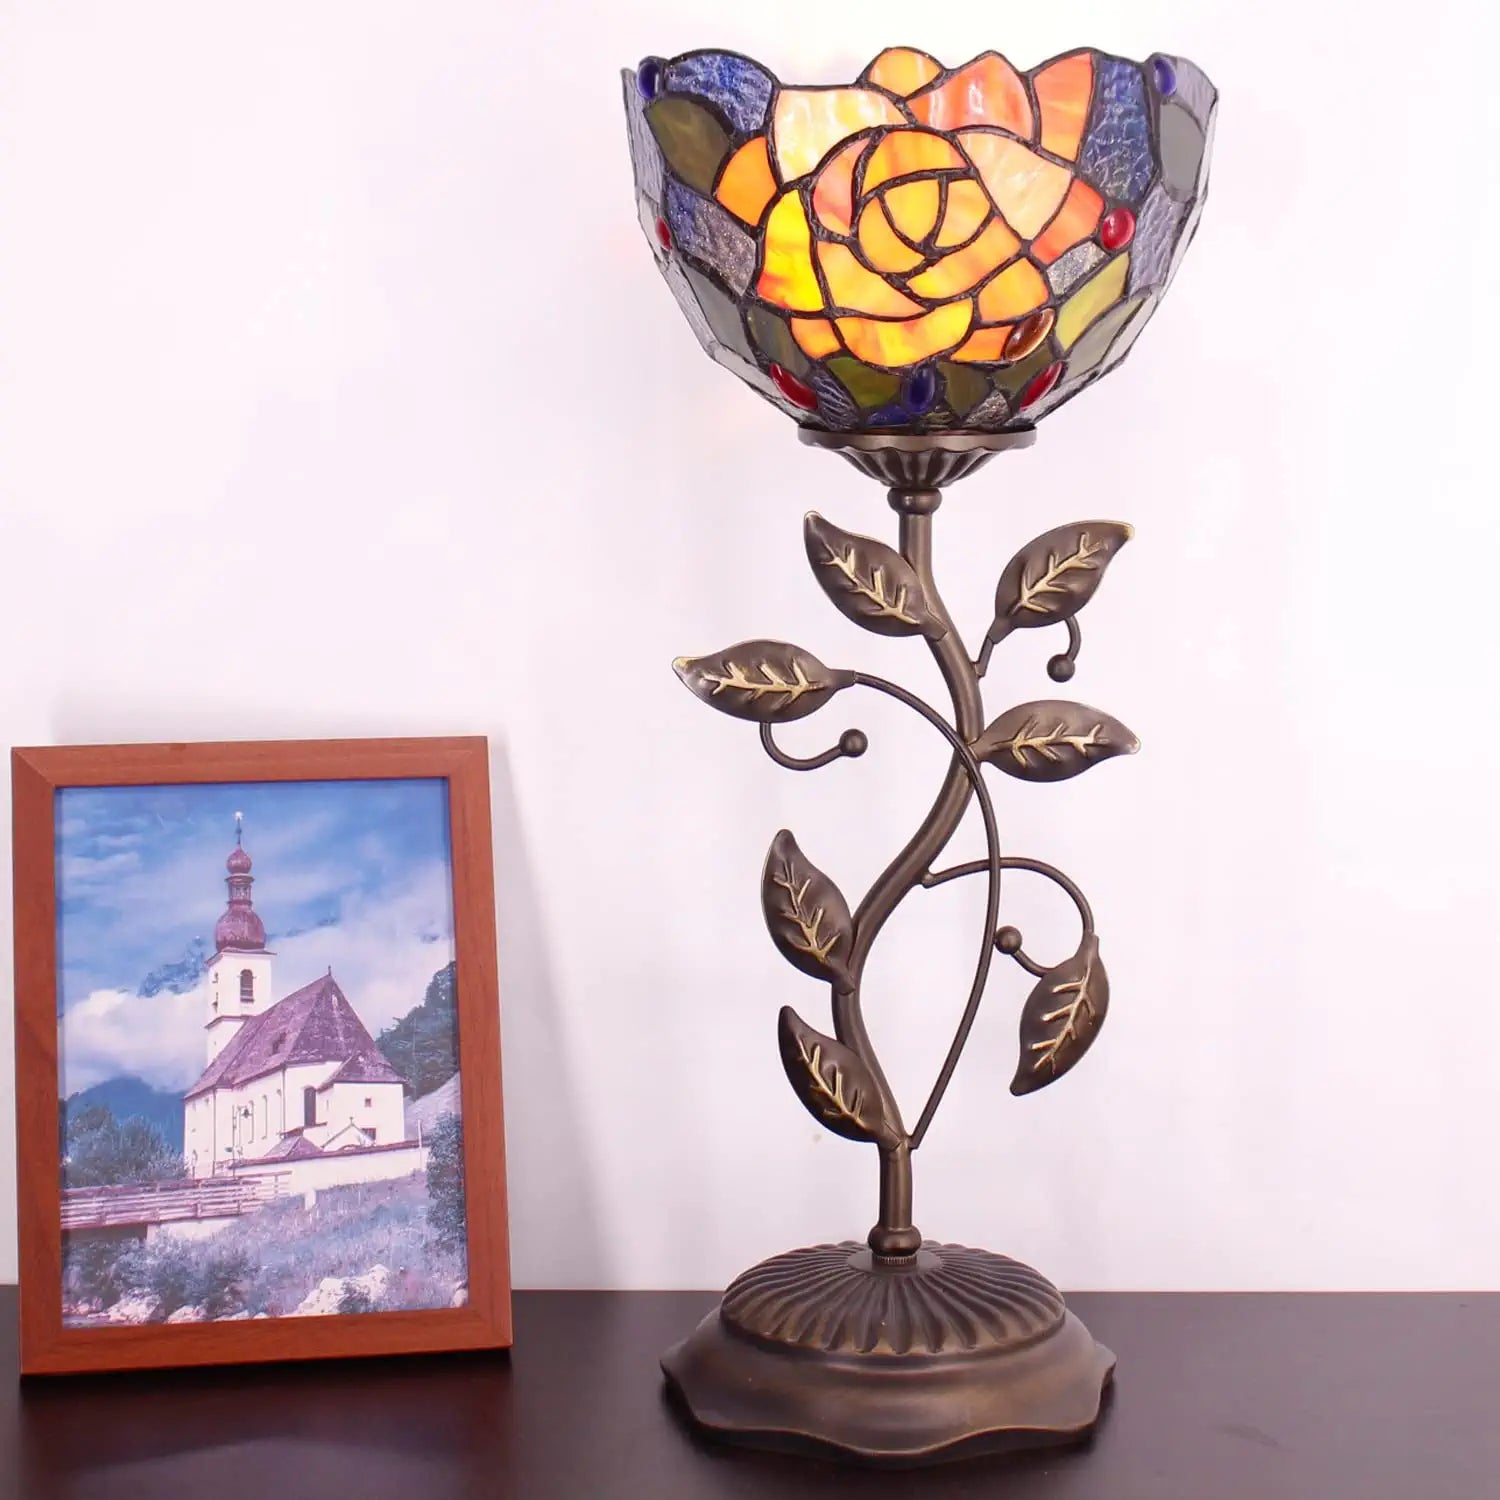 WERFACTORY Small Tiffany Table Lamp 8" Stained Glass Rose Style Shade 19" Tall Antique Vintage Metal Leaf Base Mini Bedside Accent Desk Torchiere Uplight